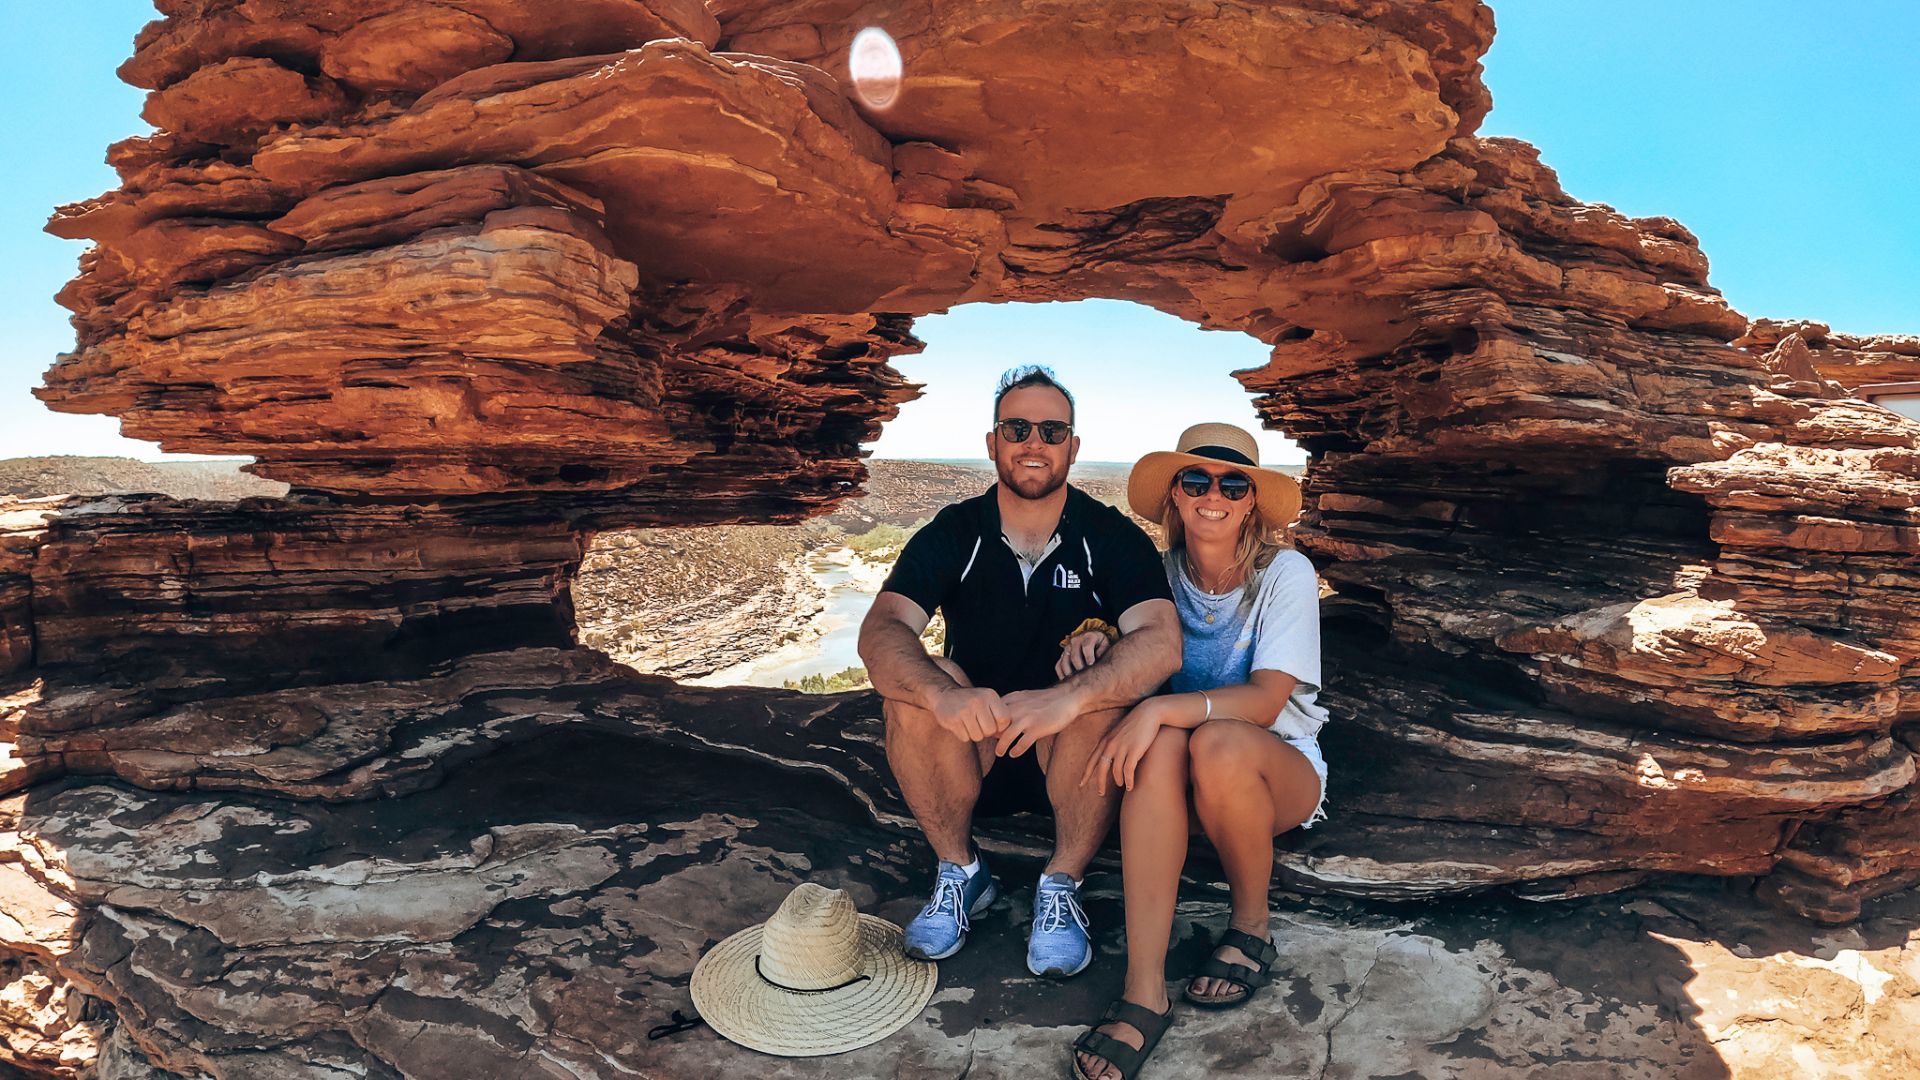 Kalbarri National Park - The MidWest